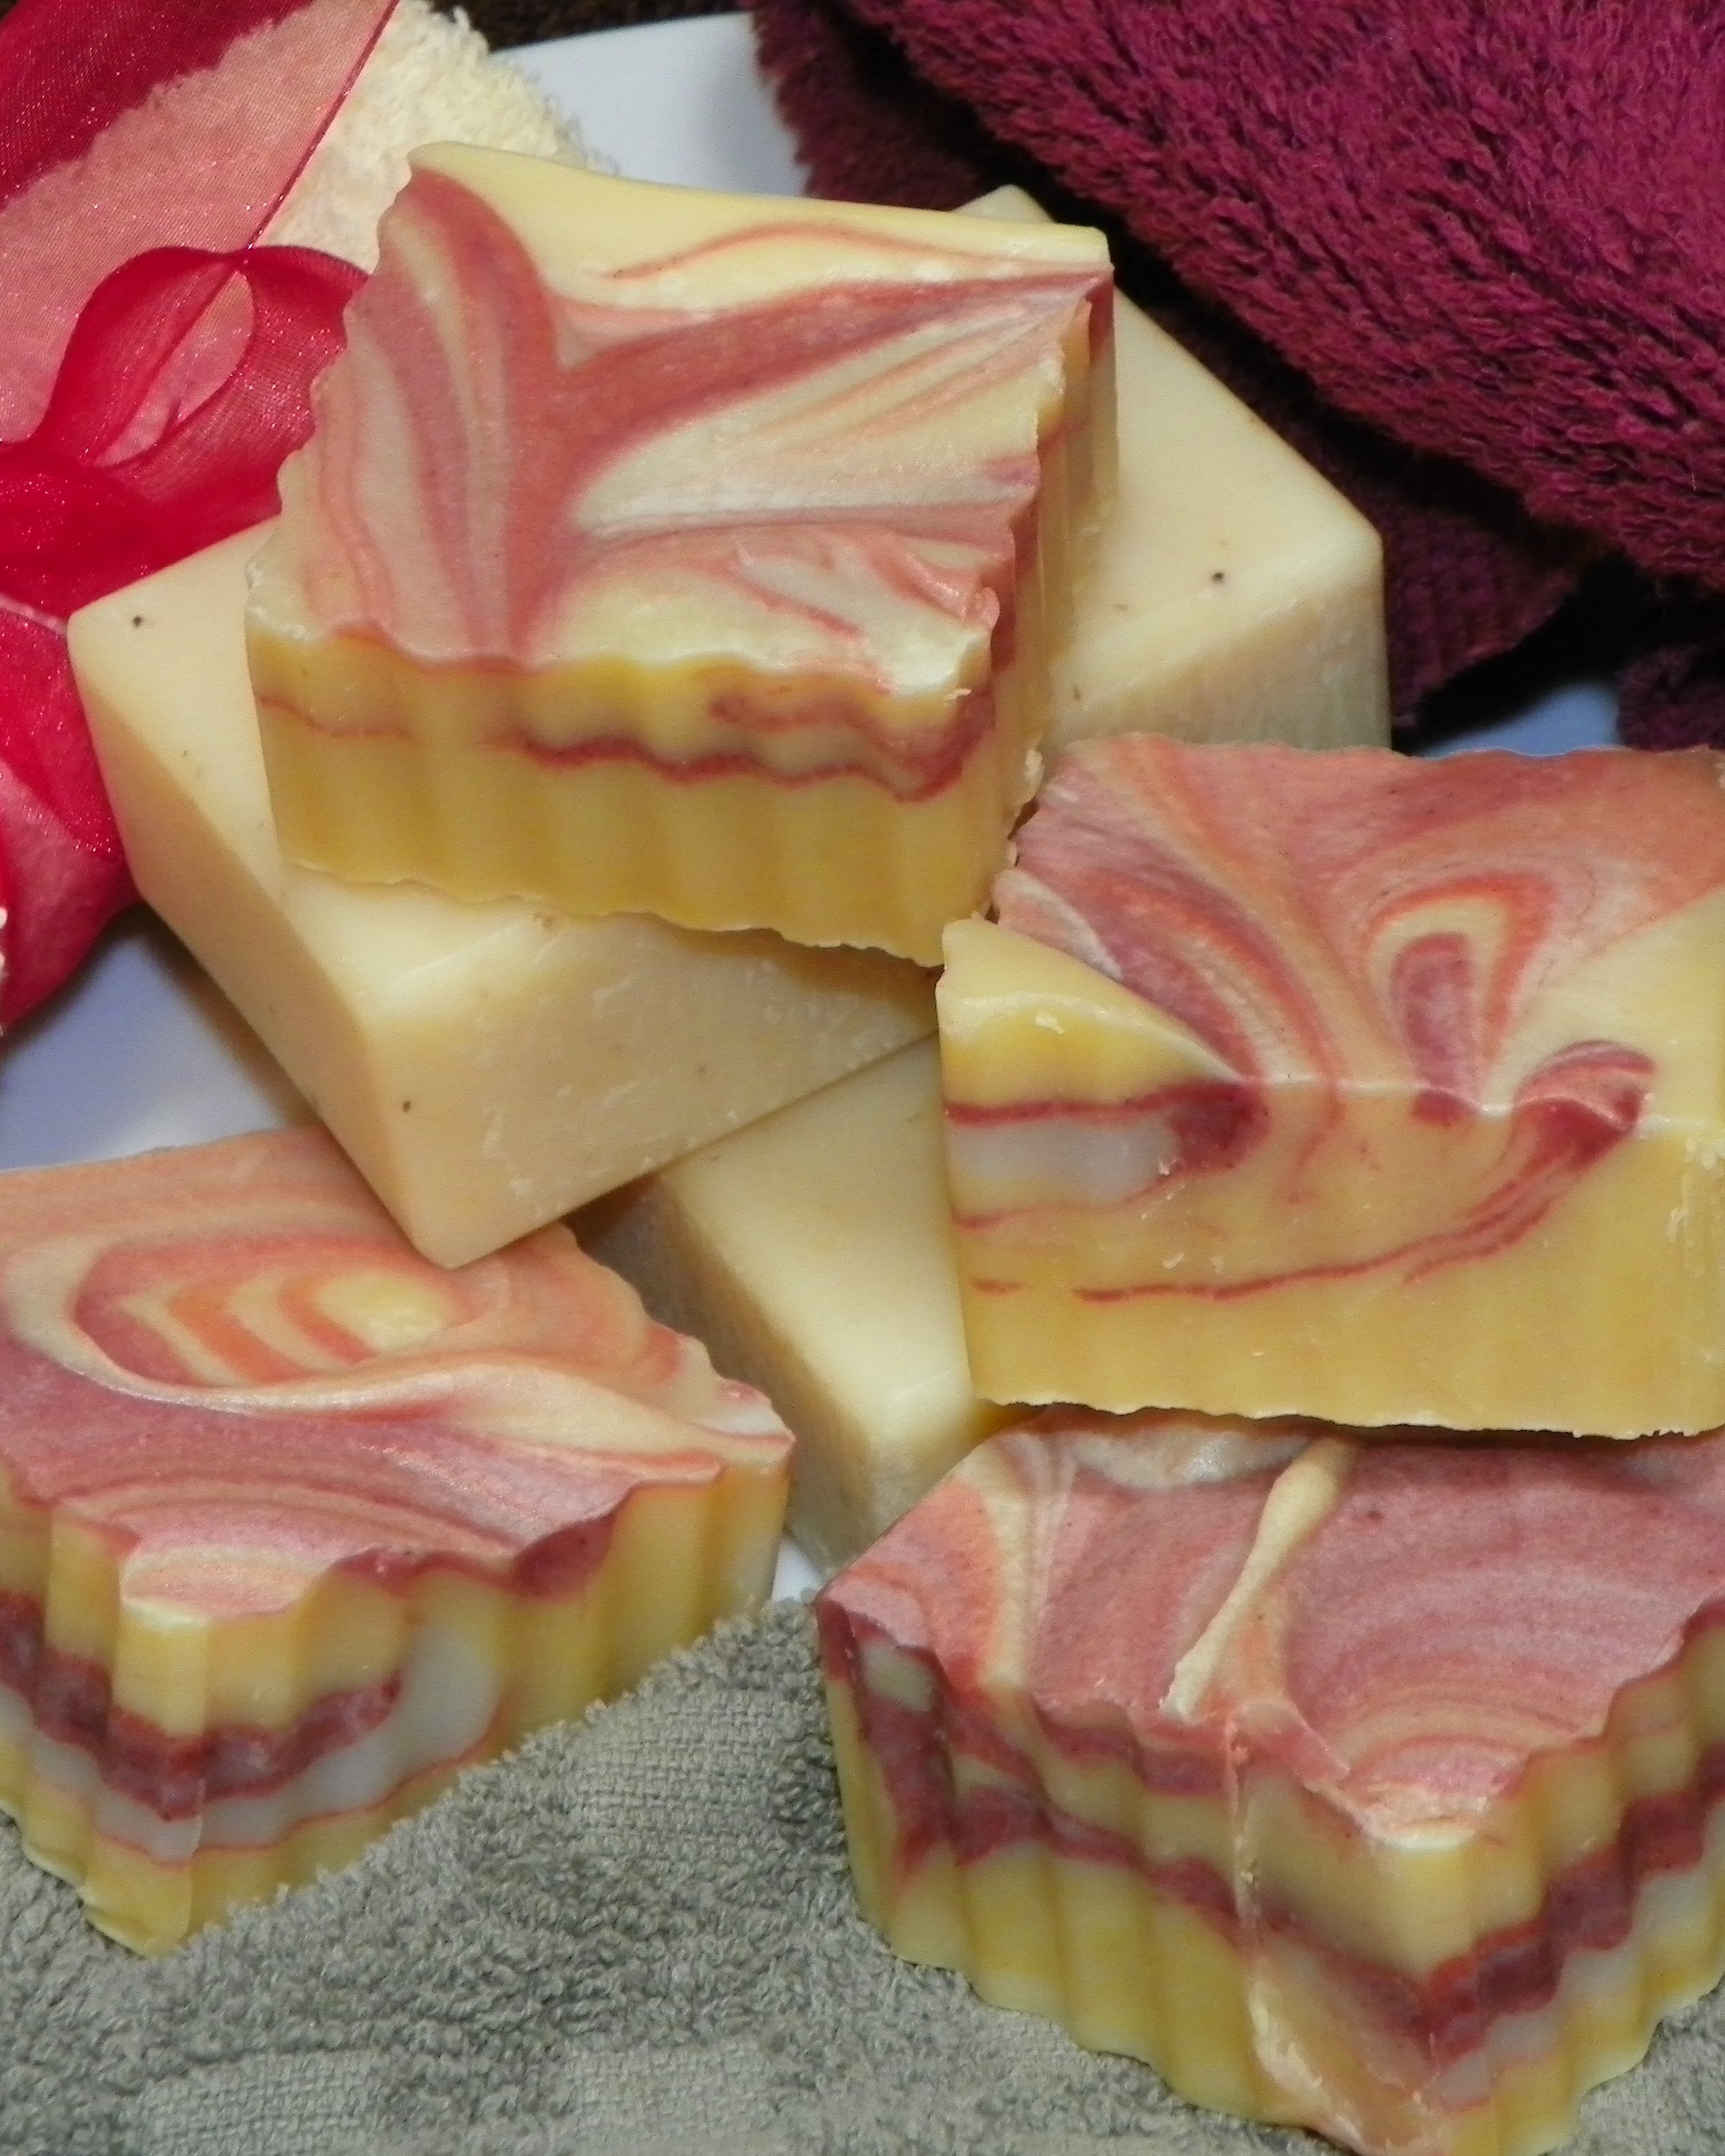 Yellow handmade soap, naturally colored with turmeric and rose clay.